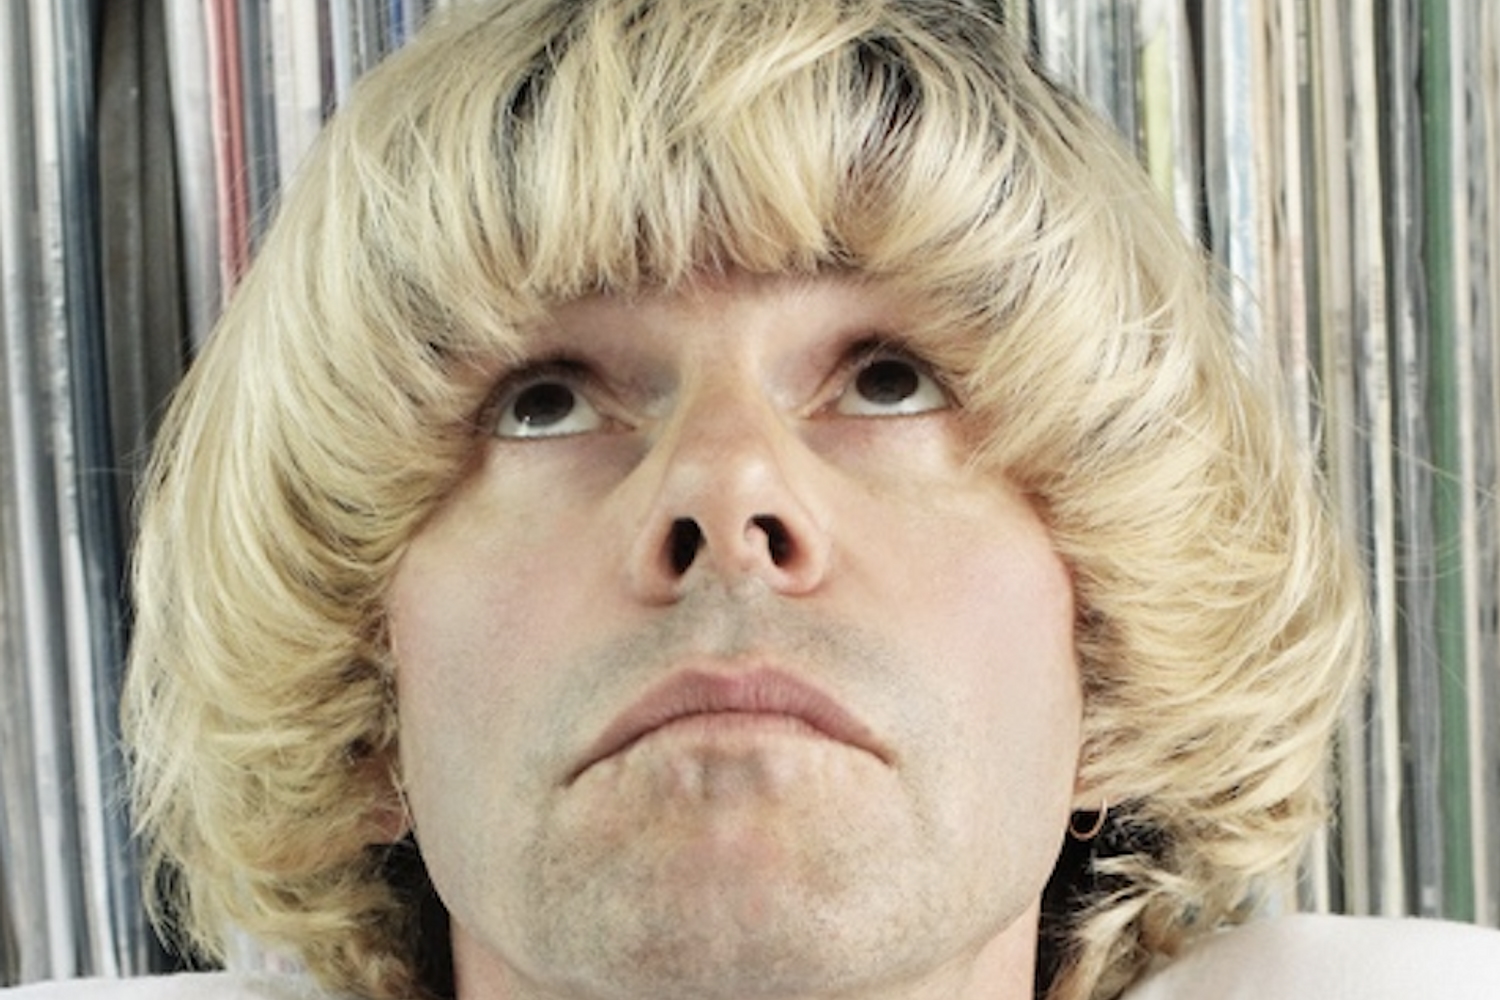 Tim Burgess announces new EP ‘Ascent Of The Ascended’